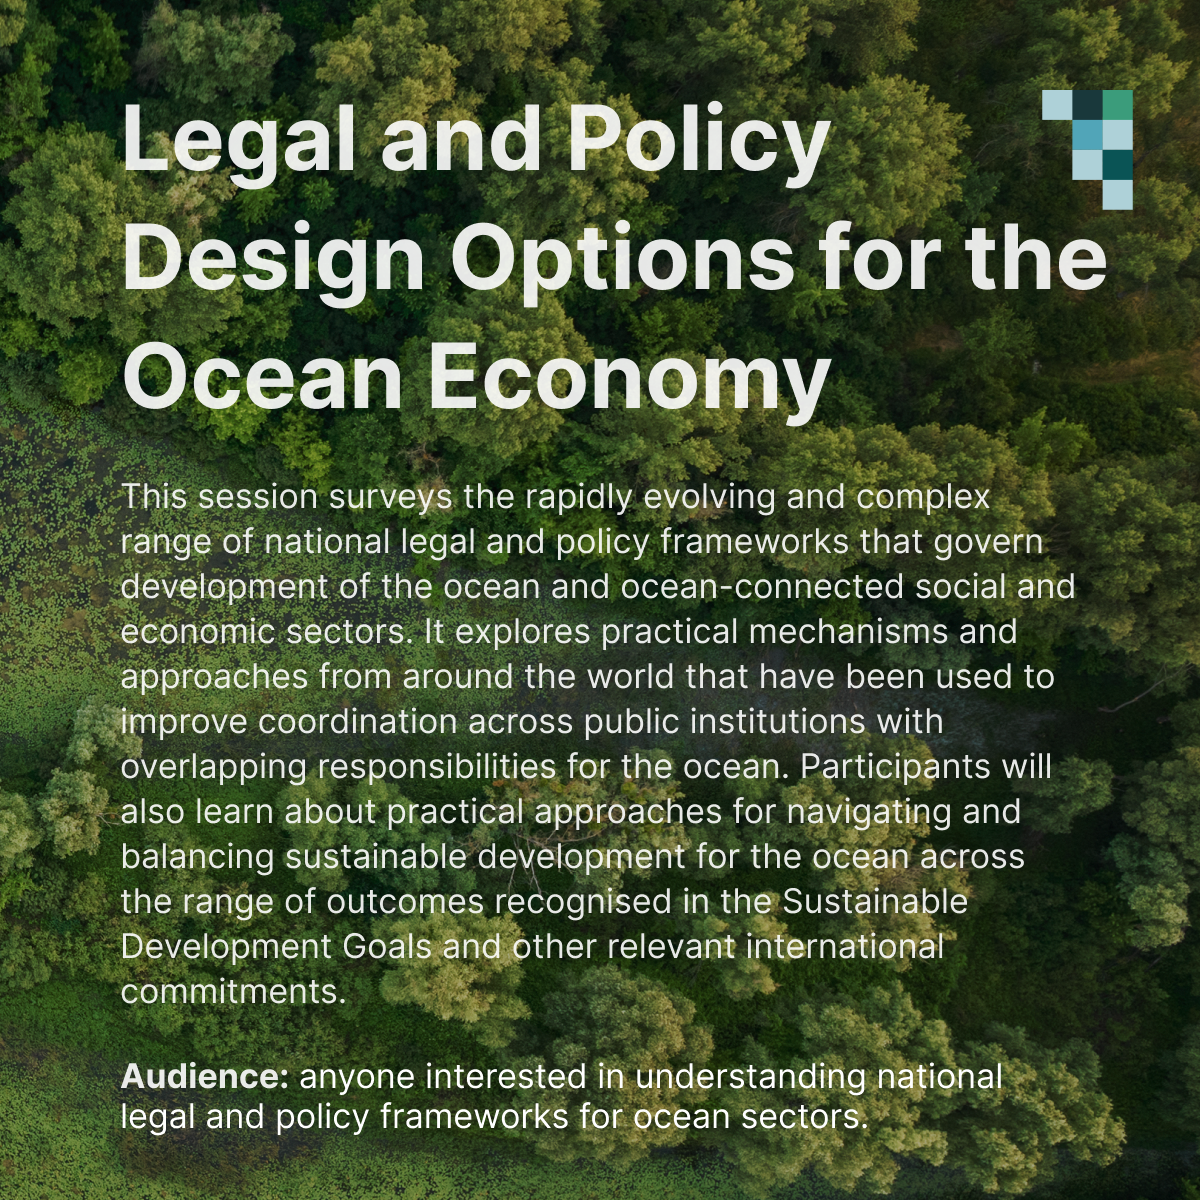 The Global Dialogue on Sustainable Ocean Development